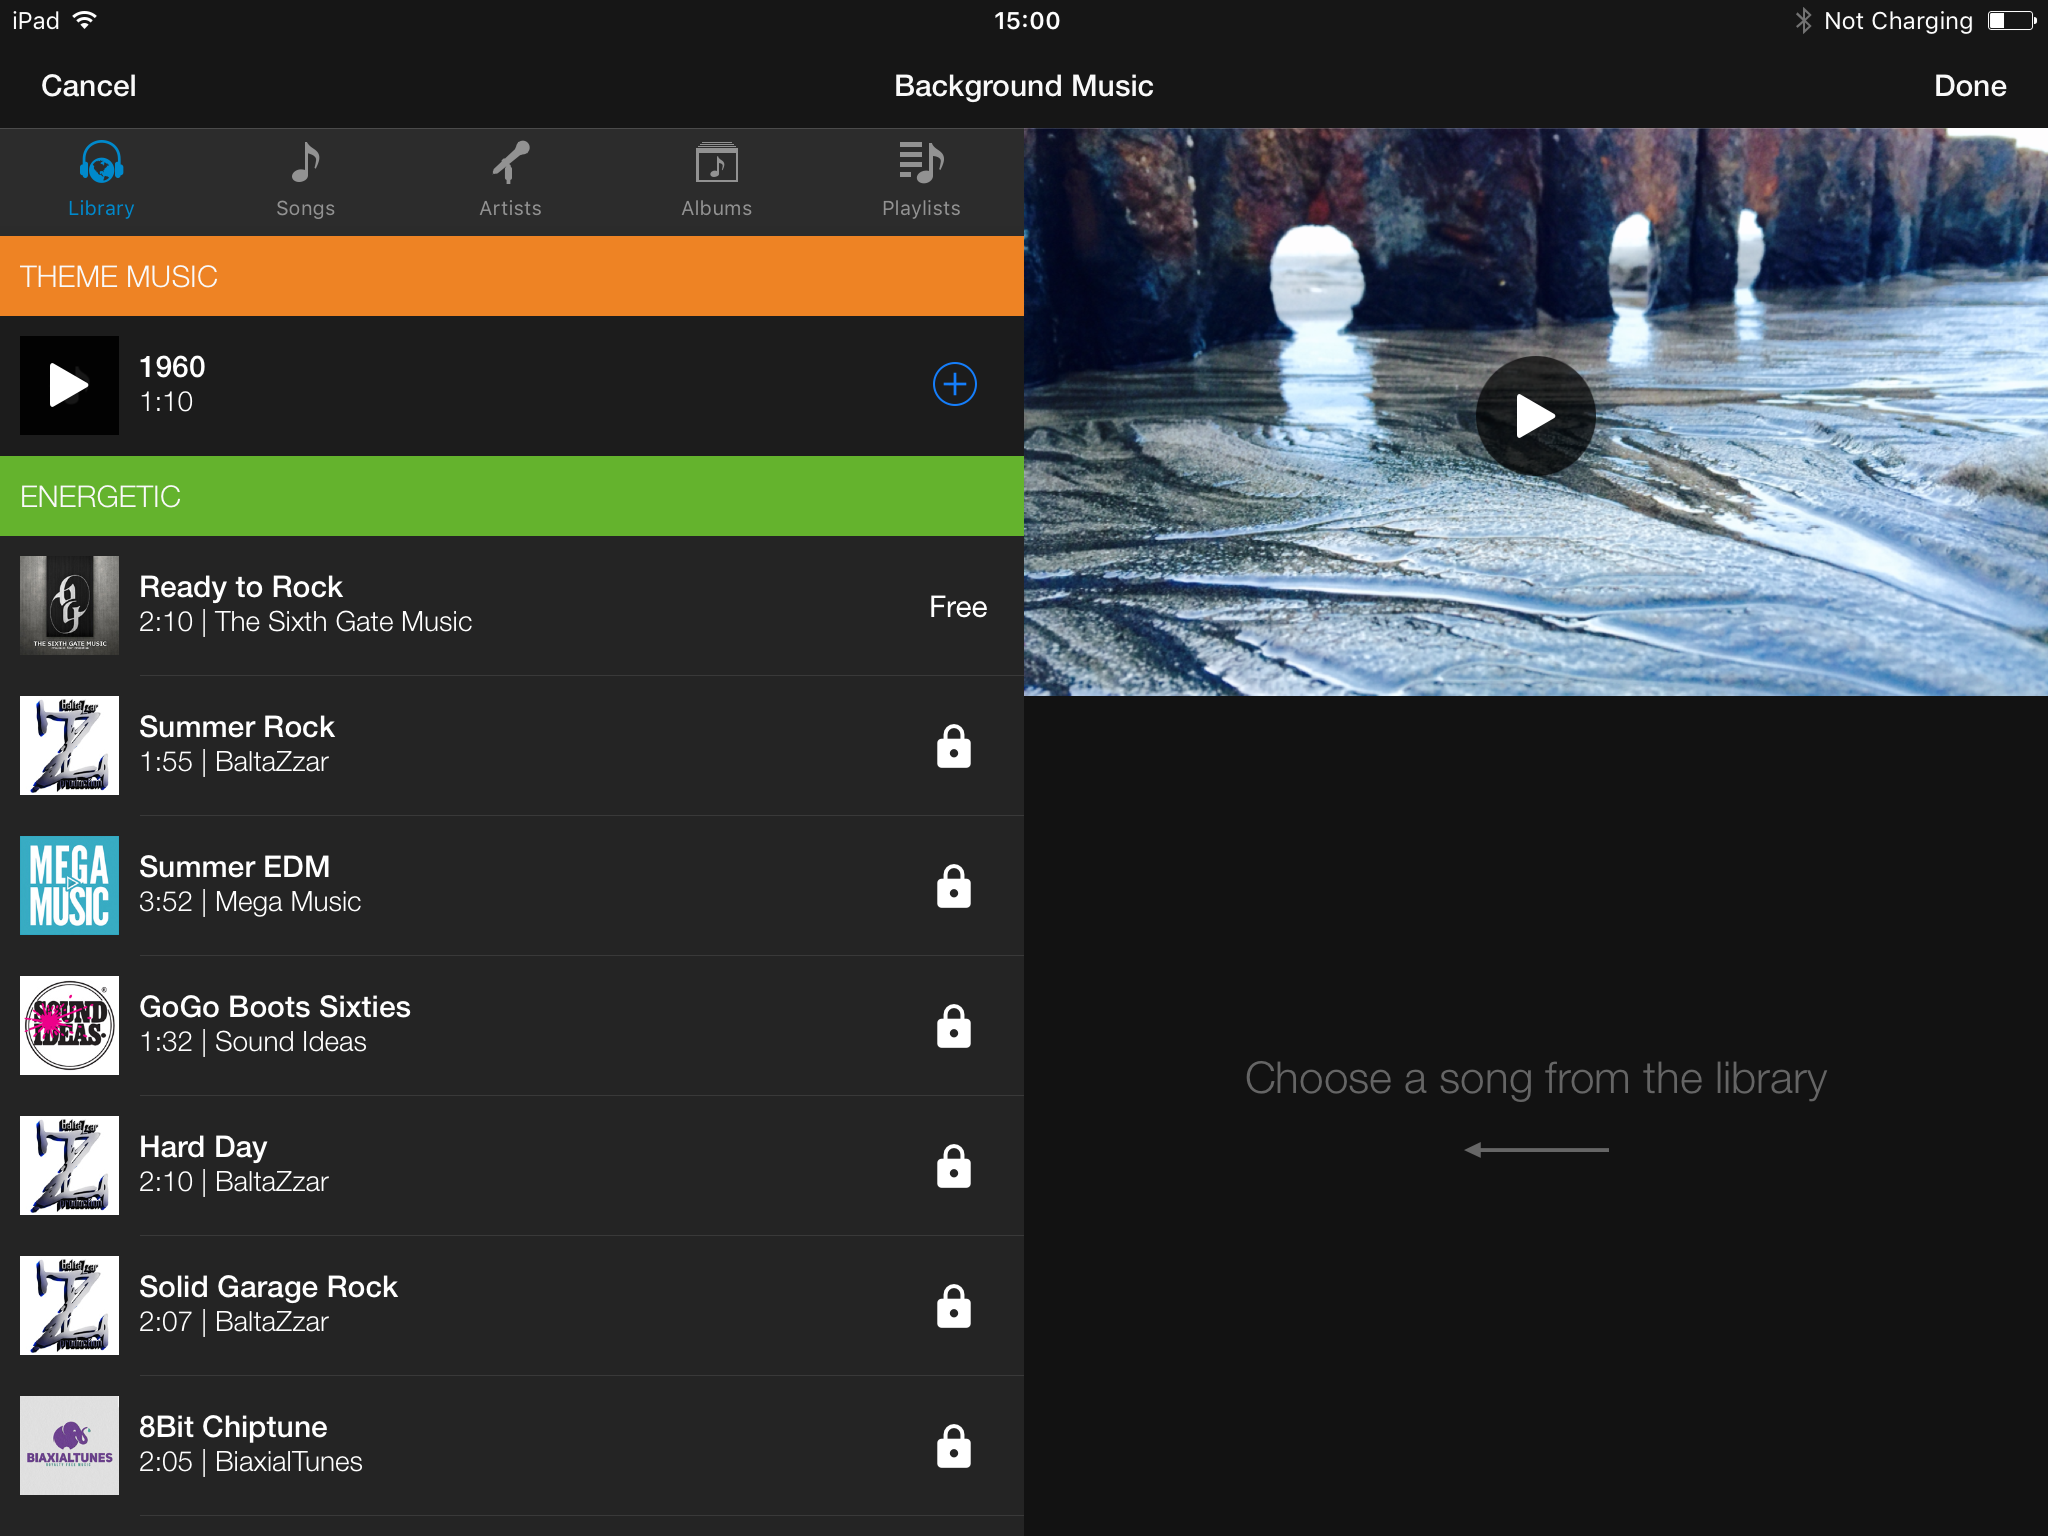 How To Create A Video Using Wevideo For Ipad Wevideo